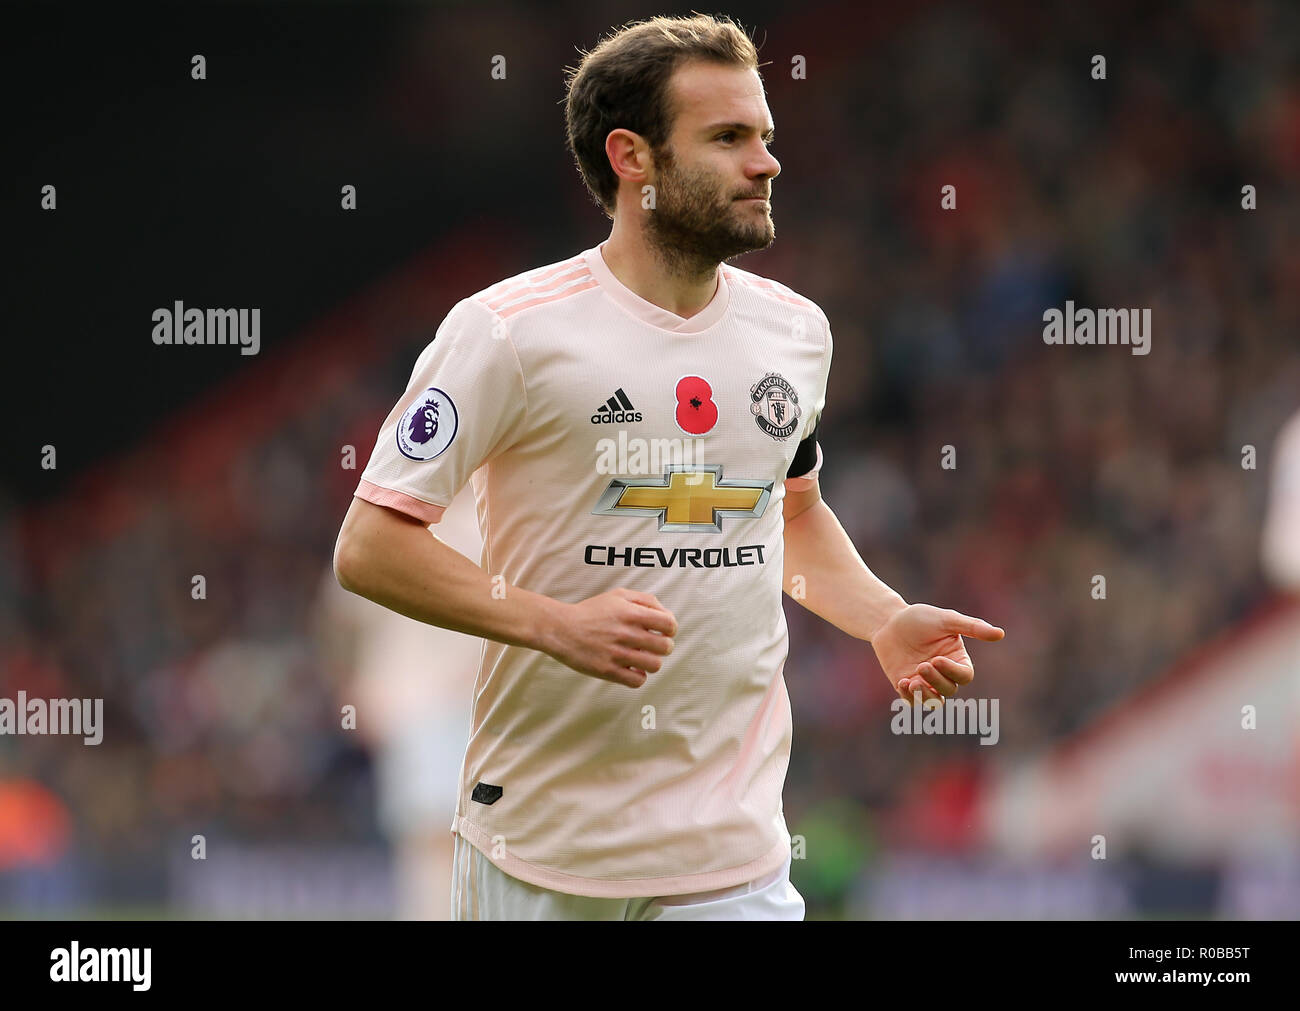 A poppy visible on Manchester United's Juan Mata's shirt during the Premier  League match at The Vitality Stadium, Bournemouth. PRESS ASSOCIATION Photo.  Picture date: Saturday November 3, 2018. See PA story SOCCER